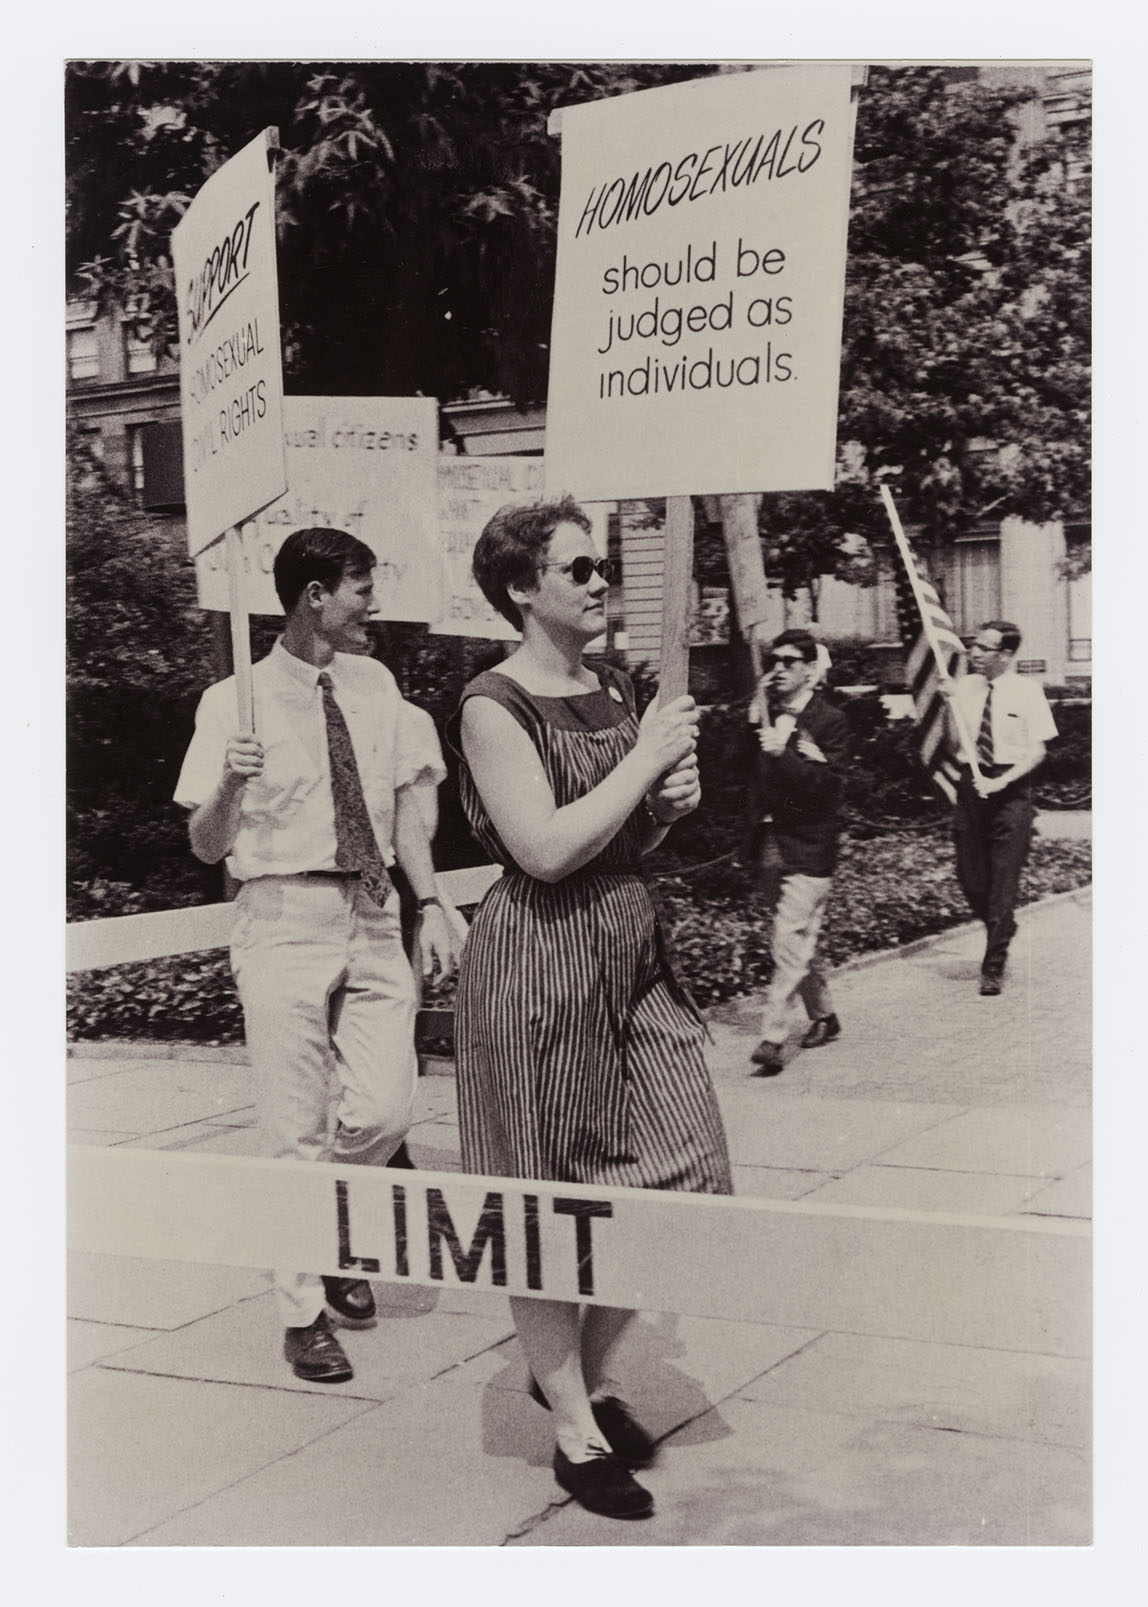 Figure 2. Barbara Gittings in picket line (1966). Photographed by Kay Tobin. Permission from NYPL.